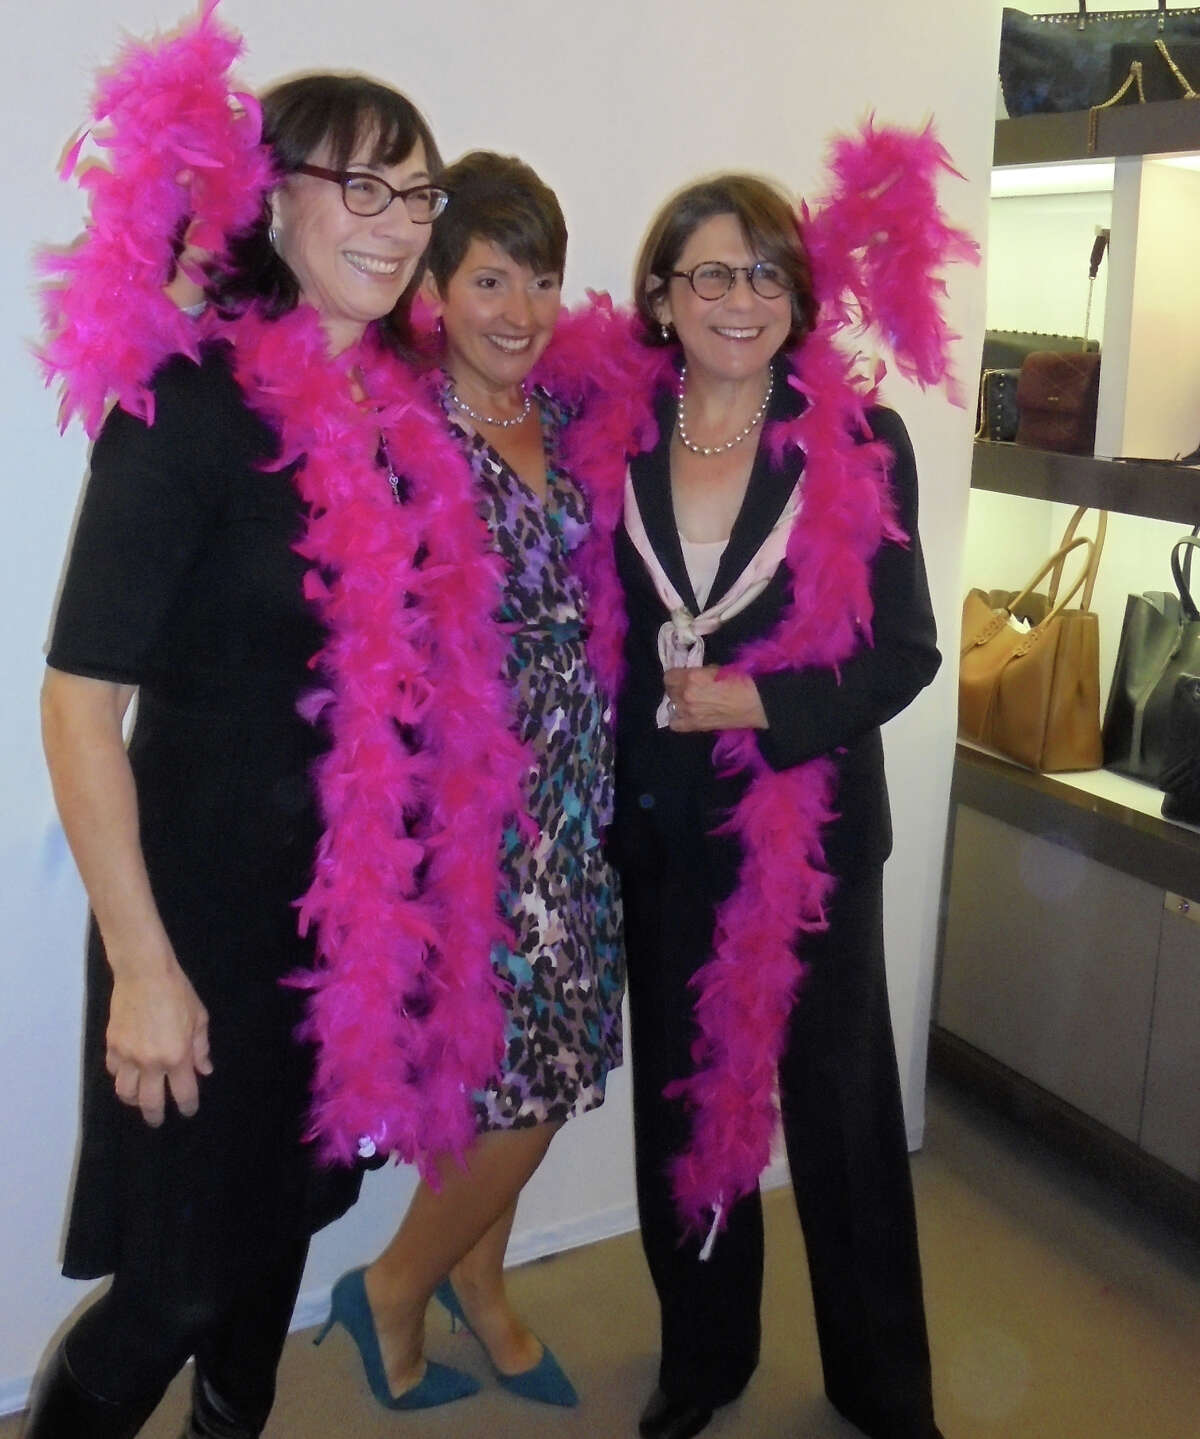 At a photo booth at the 5th annual Pink Aid event, people were invited to pose wearing pink feather boas. Here, from left, are Sandy Rappaport of SIR Development, and Doris Ghitelman and Jillian Klaff, both of William Raveis Real Estate.